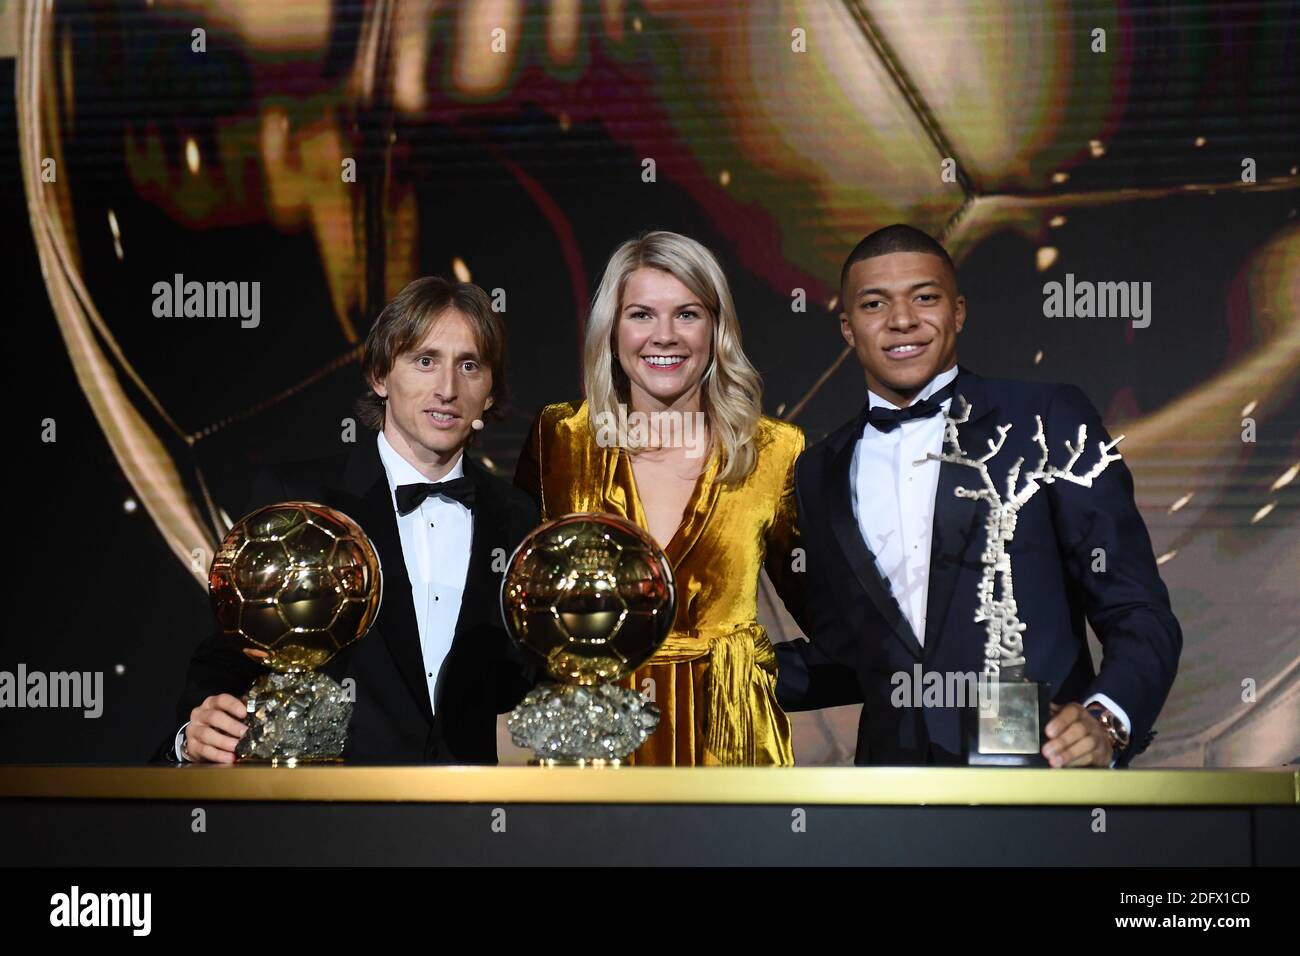 Luka Modric, Ada Hegerberg, Kylian Mbappe during the Ballon d'Or ceremony  at Le Grand Palais on December 3, 2018 in Paris, France. Photo by  L'Equipe/ABACAPRESS.COM Stock Photo - Alamy